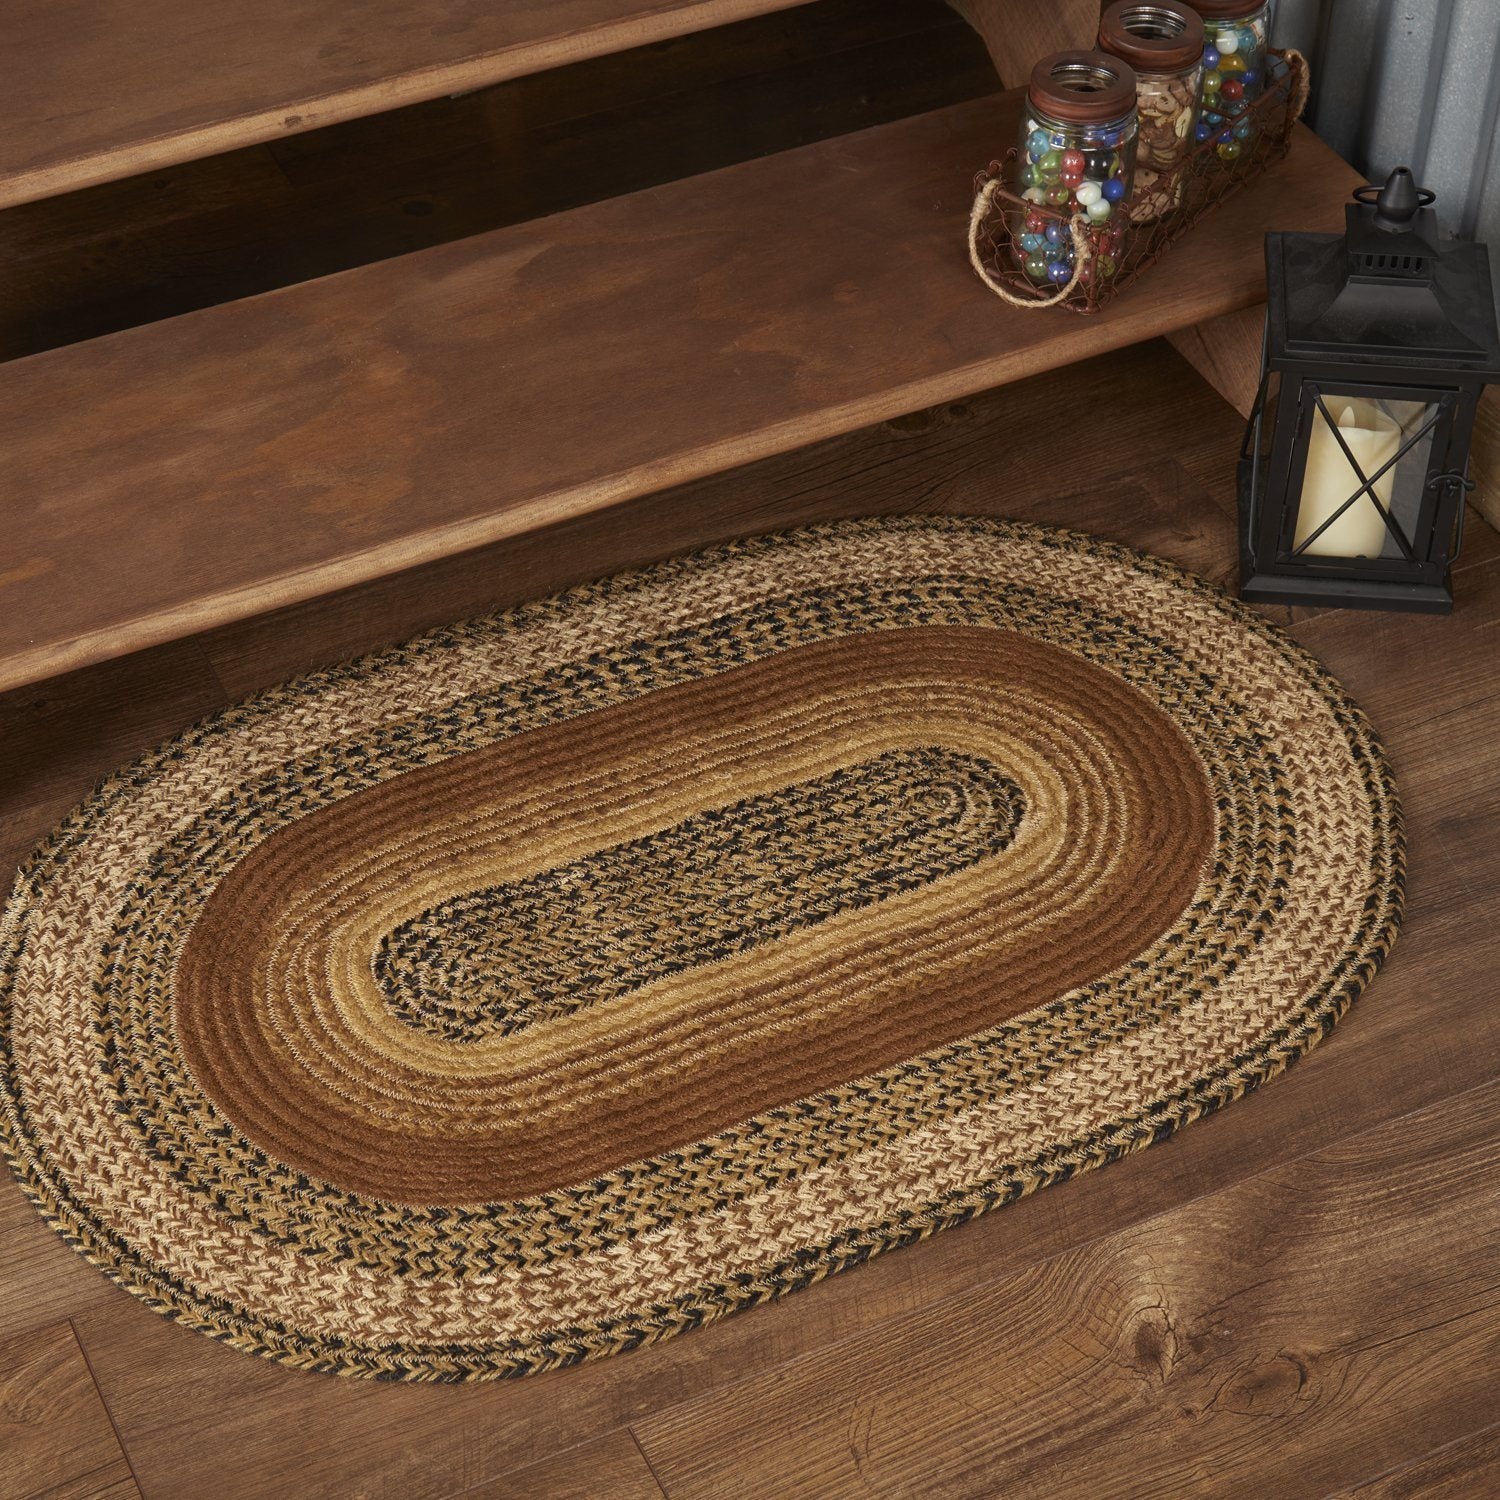 Oval rugs